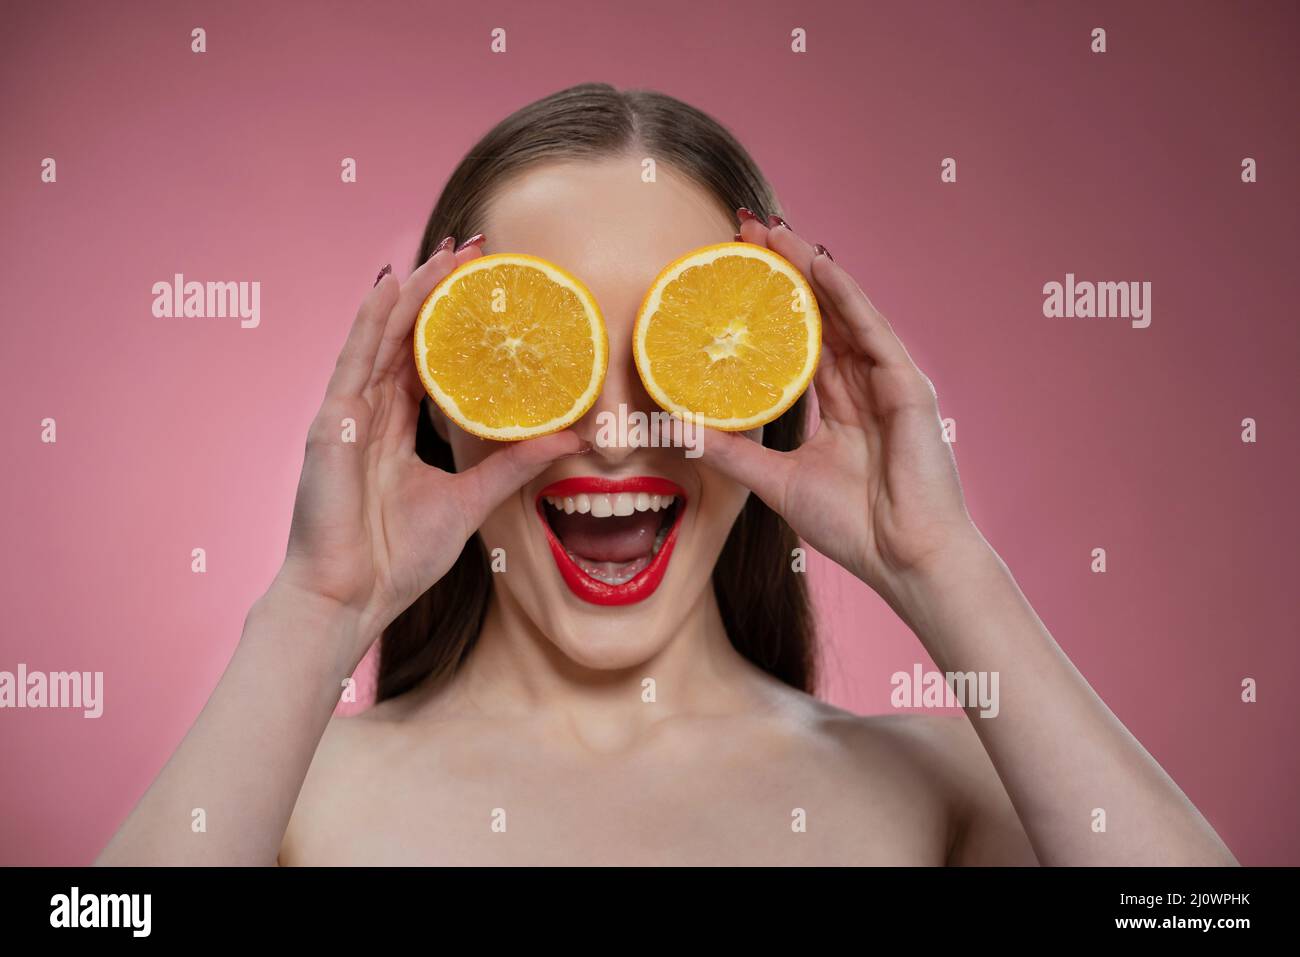 Funny beautiful beauty model young woman holding two juicy orange slices as her eyes or glasses. Charming joyful funny lady with Stock Photo